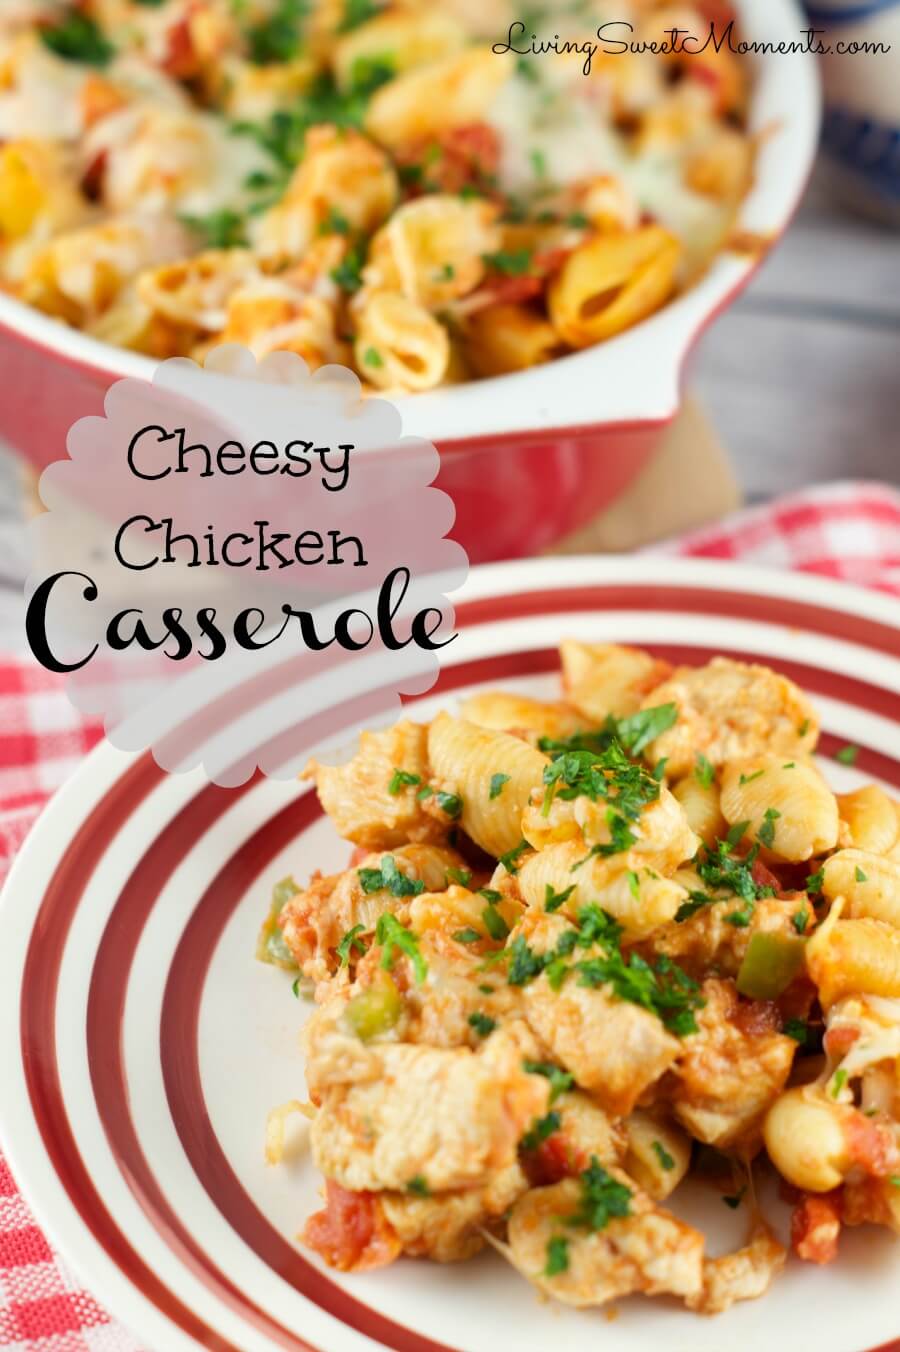 Cheesy Chicken Casserole - Only 6 ingredients. Made with pasta, tomato and cheese. This easy quick dinner recipe is delicious, hearty and oh so satisfying.